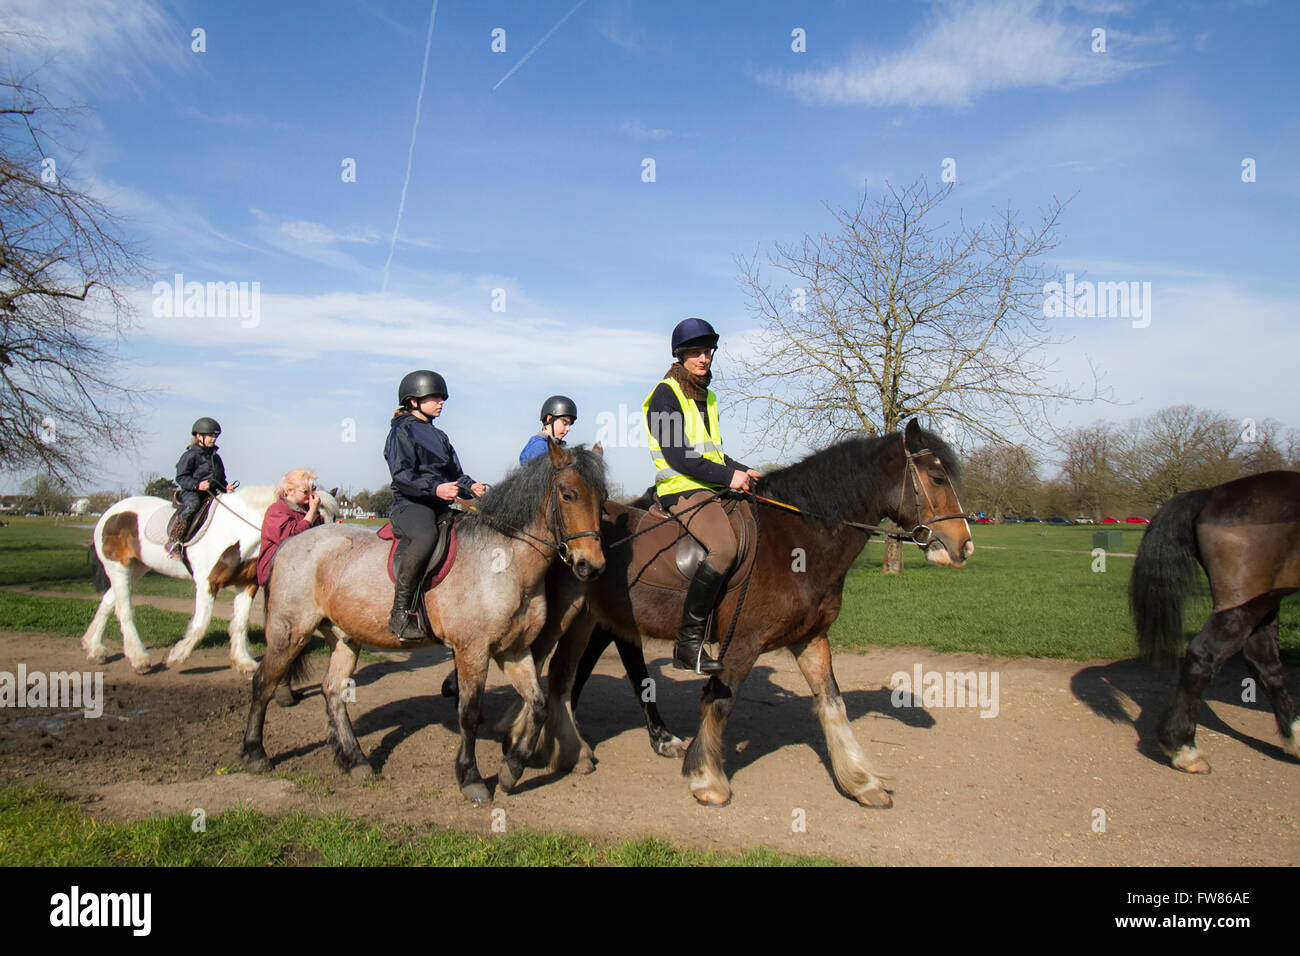 Wimbledon London, UK. 1st April 2016. UK Weather: A group of horse riders form a riding school enjoy the spring sunshine on Wimbledon Common as temperatures are forecast to rise Credit:  amer ghazzal/Alamy Live News Stock Photo